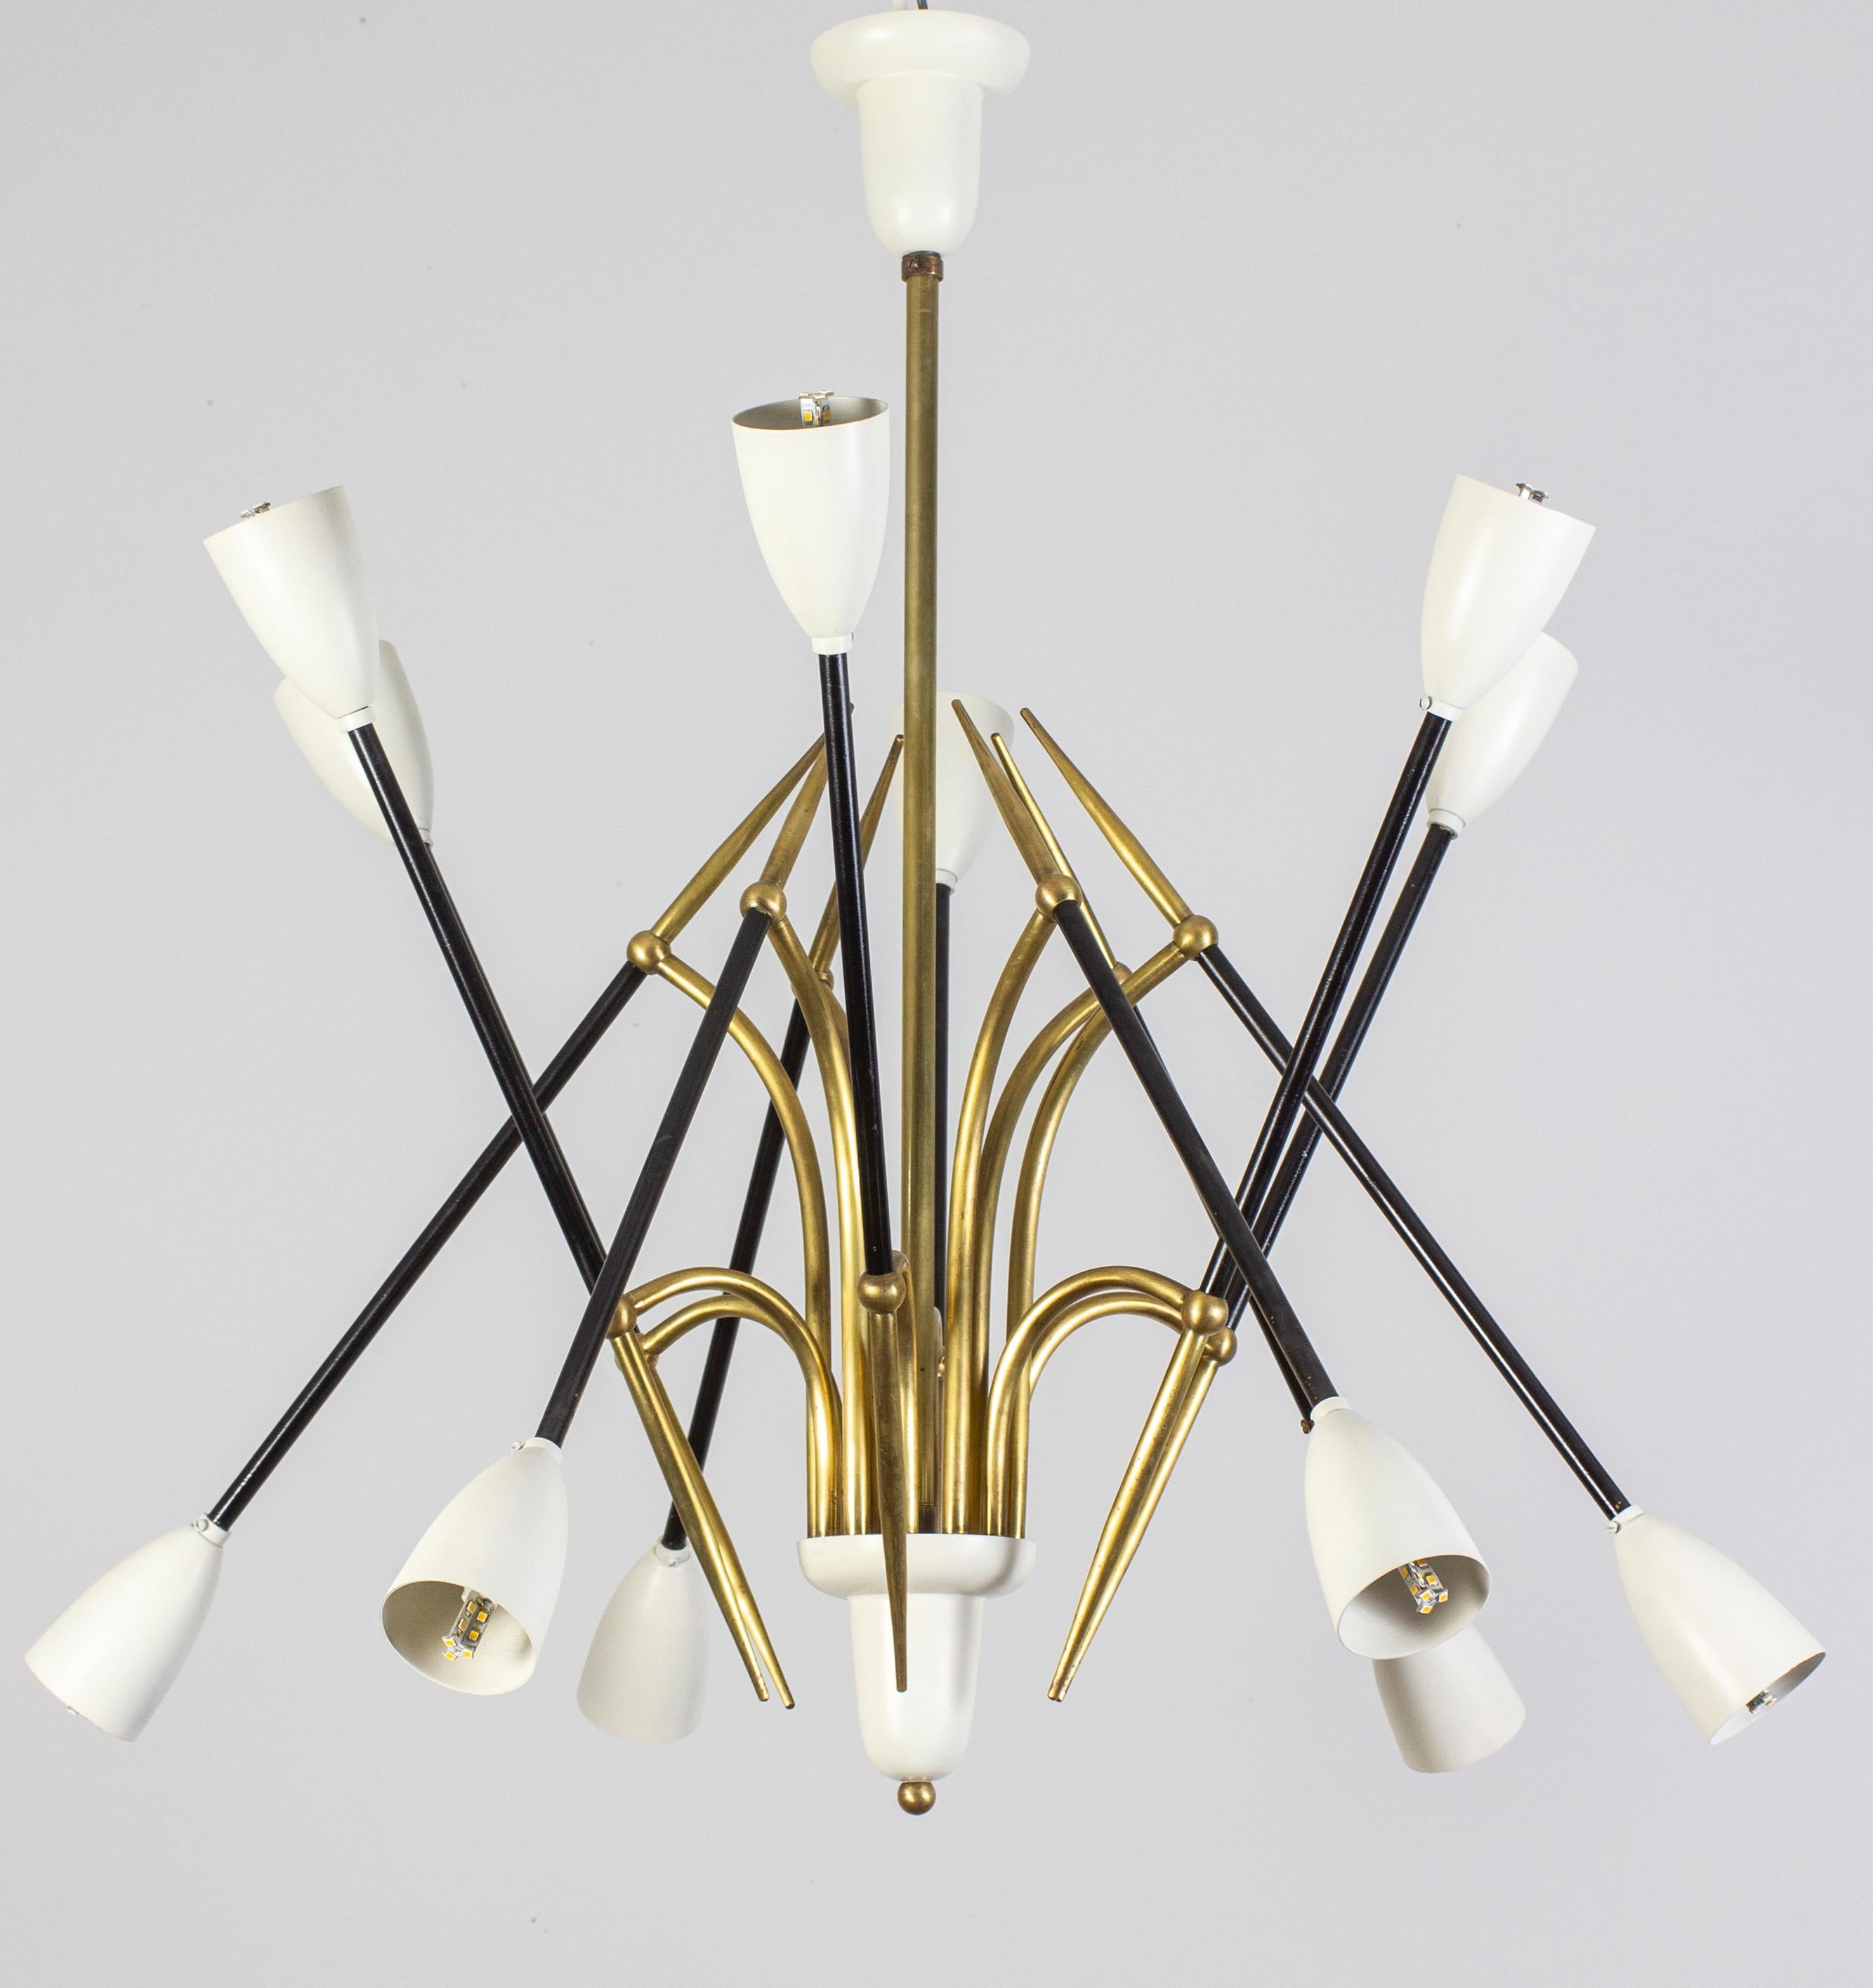 Singular  Stilnovo chandelier, features 12 arms, each supporting the ivory lacquered shades.
Elegant brass central frame.
This chandelier is in excellent original condition and we can rewire to U.S. standards.
